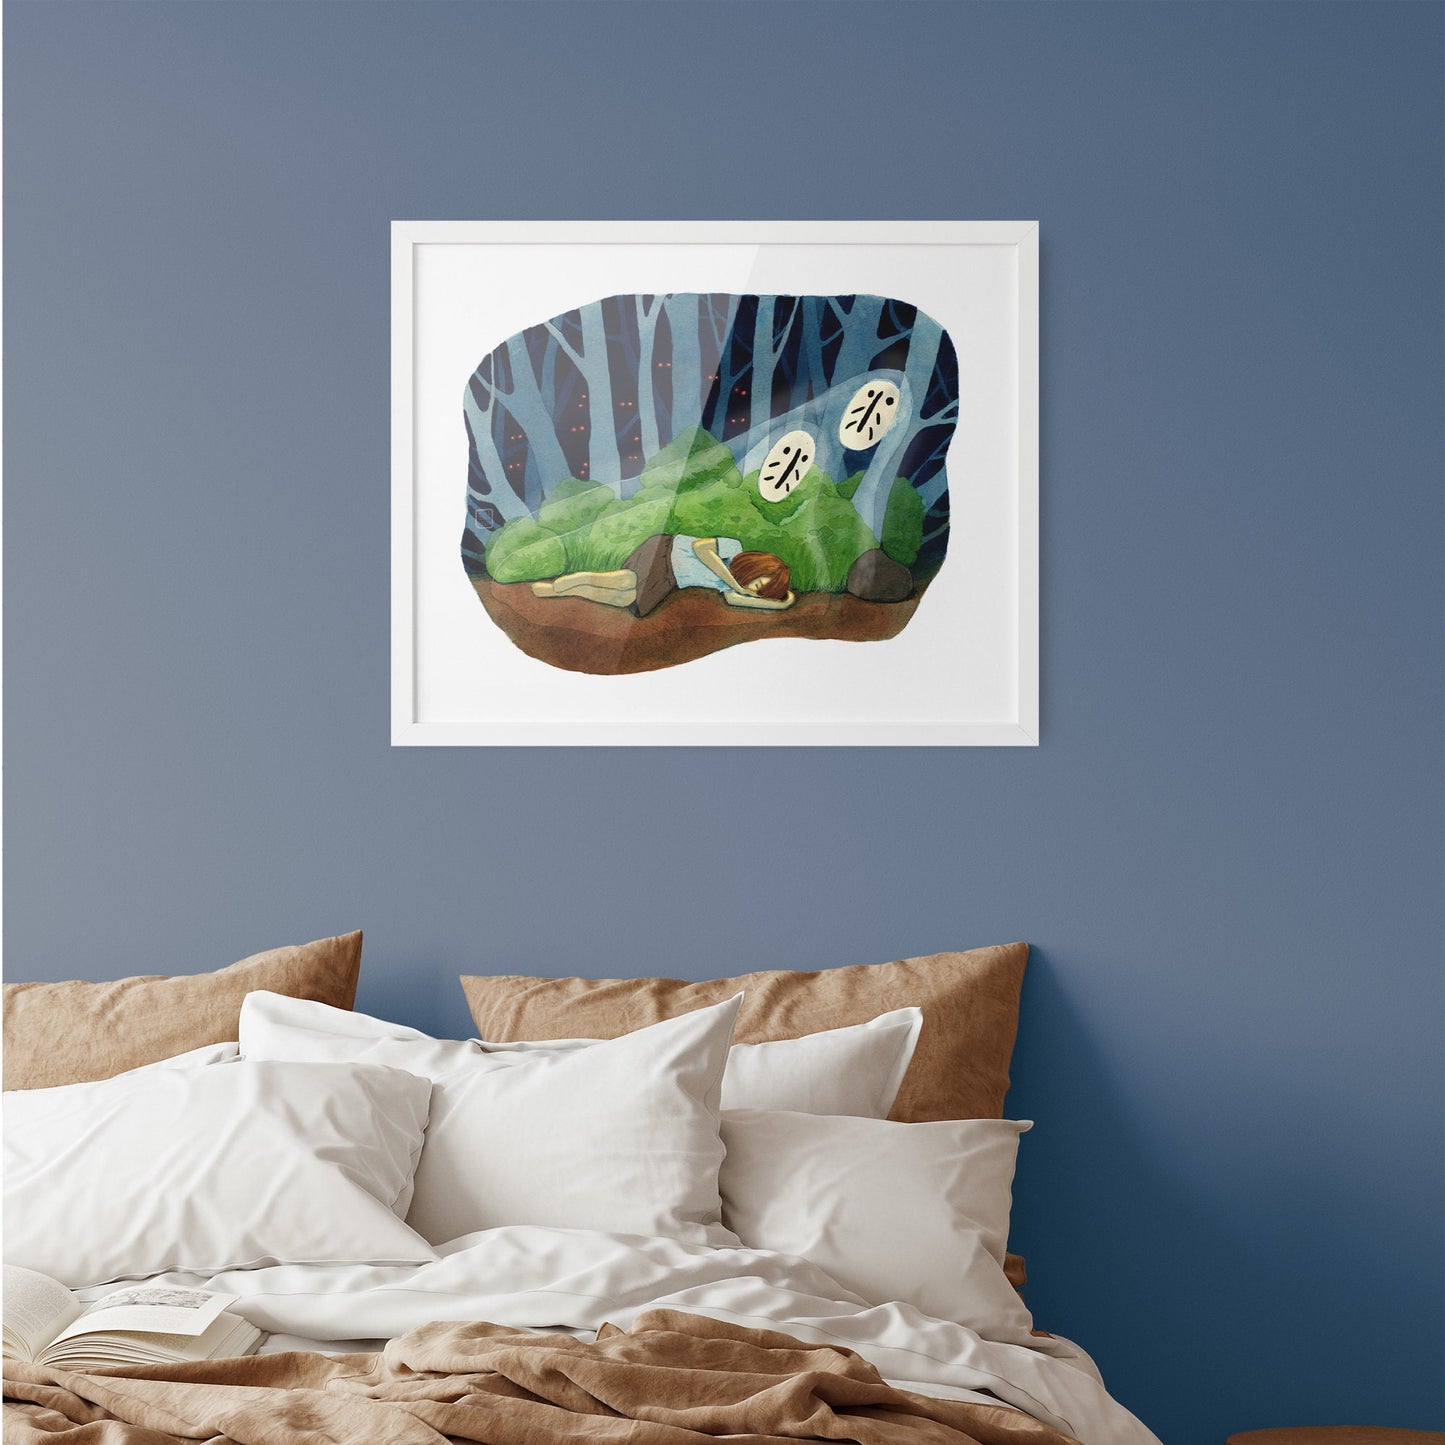 Art print 'Sleep Watcher' - 37x29cm - on fine watercolor paper - signed and limited